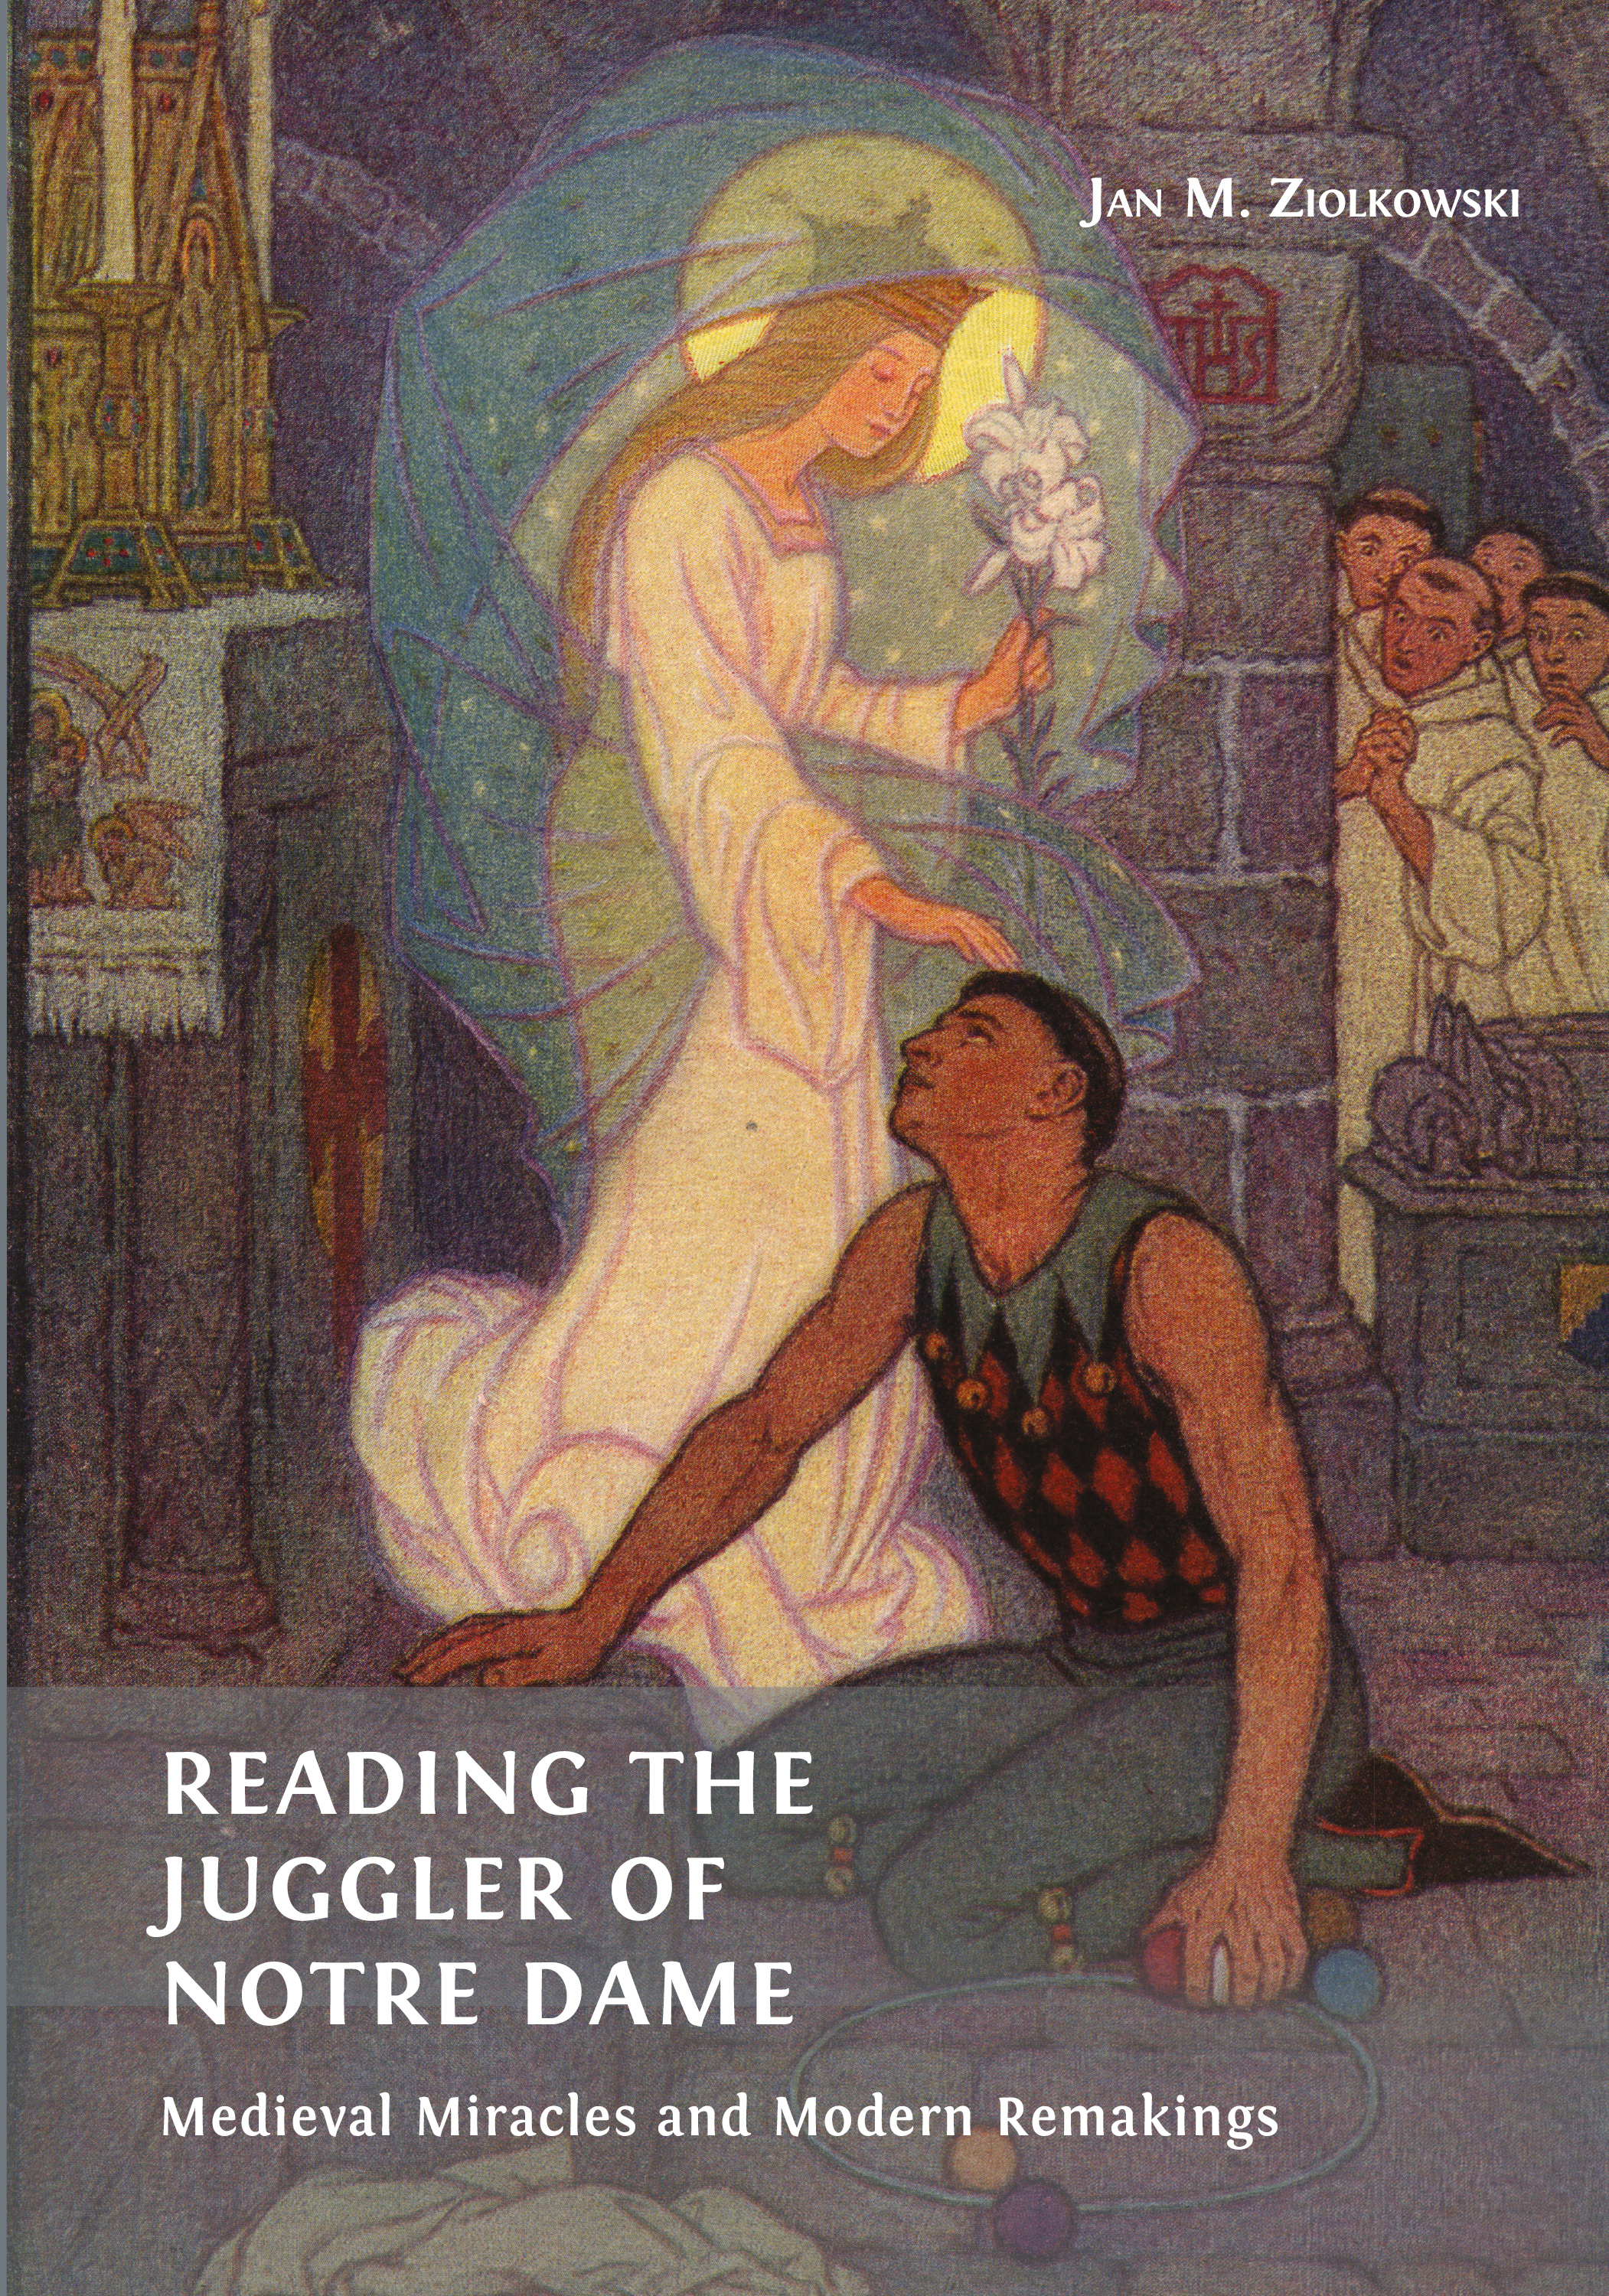 Reading the Juggler of Notre Dame book cover image